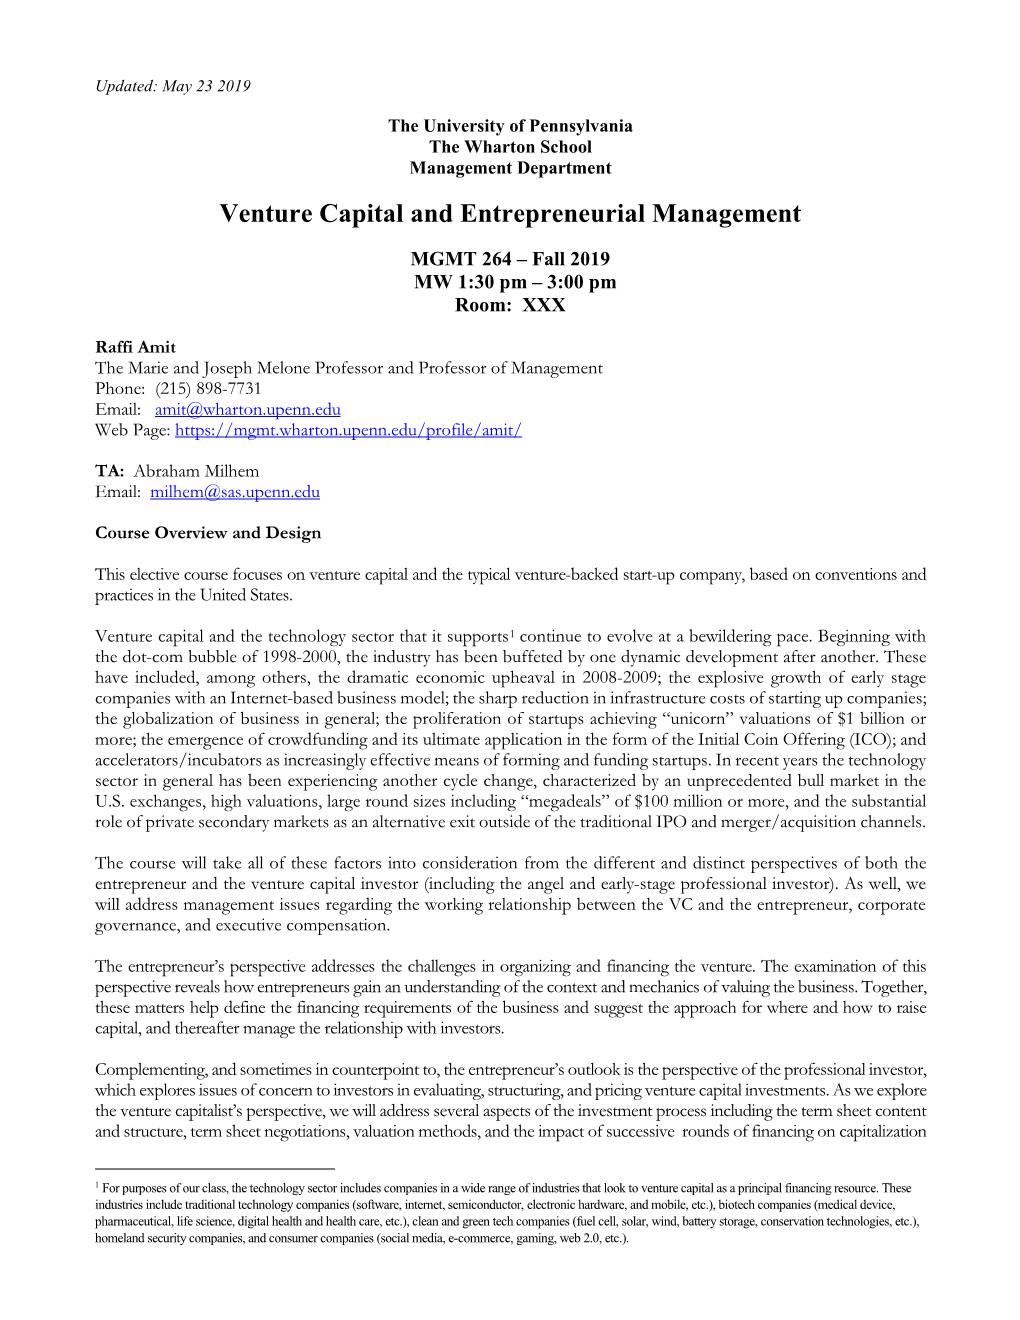 MGMT 264 VC and Entrepreneurial Management